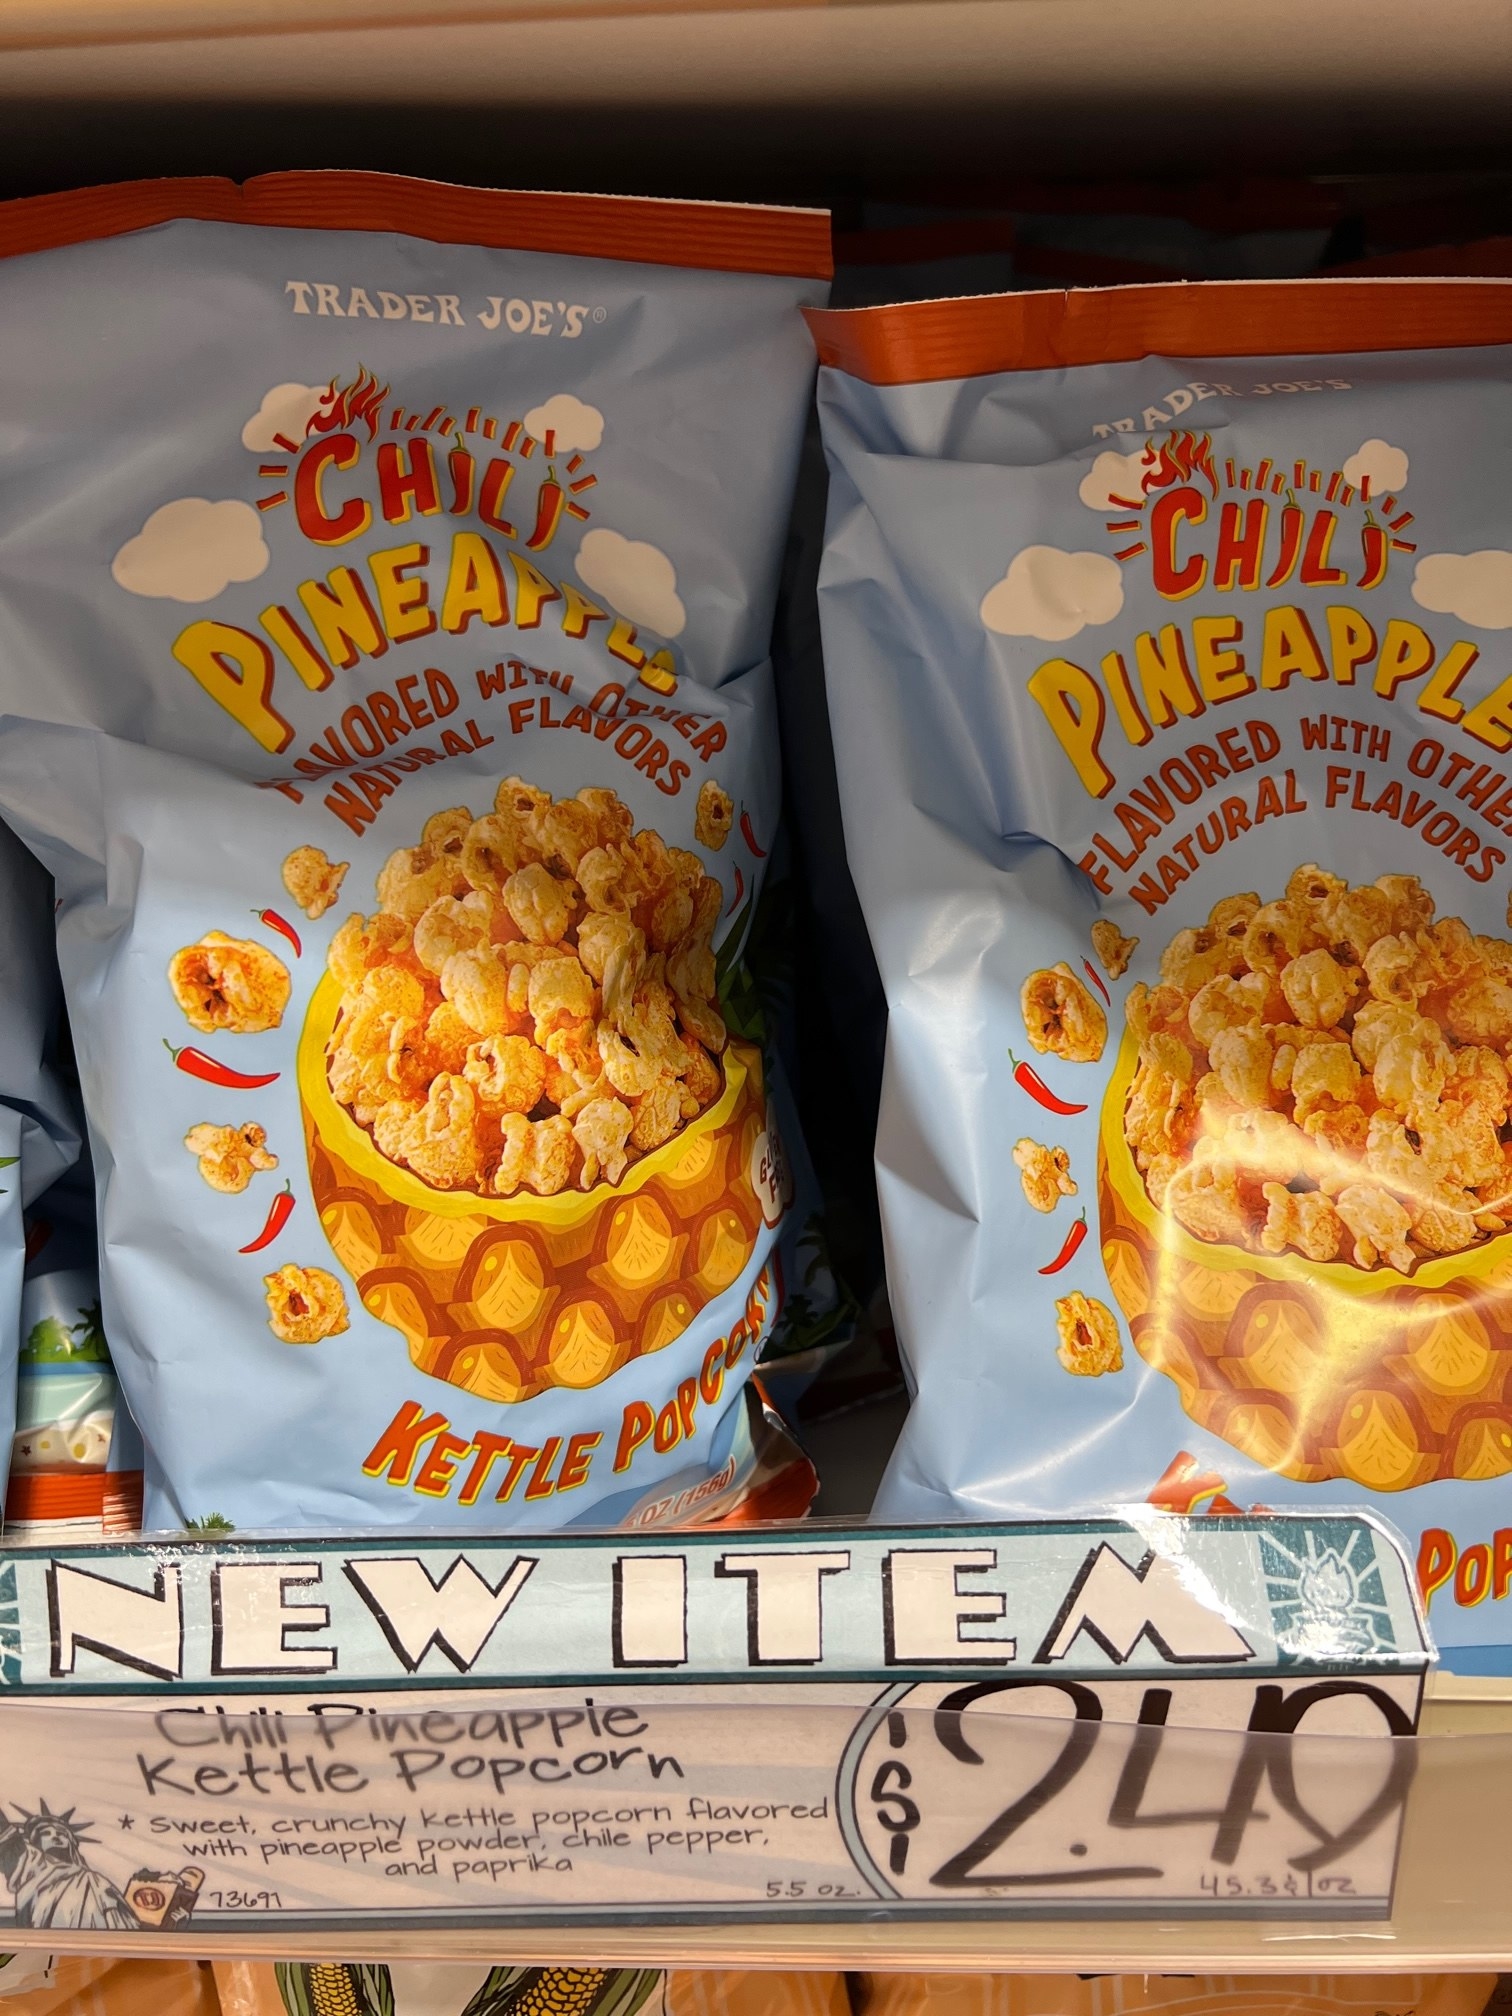 Bags of Chili Pineapple Kettle Popcorn